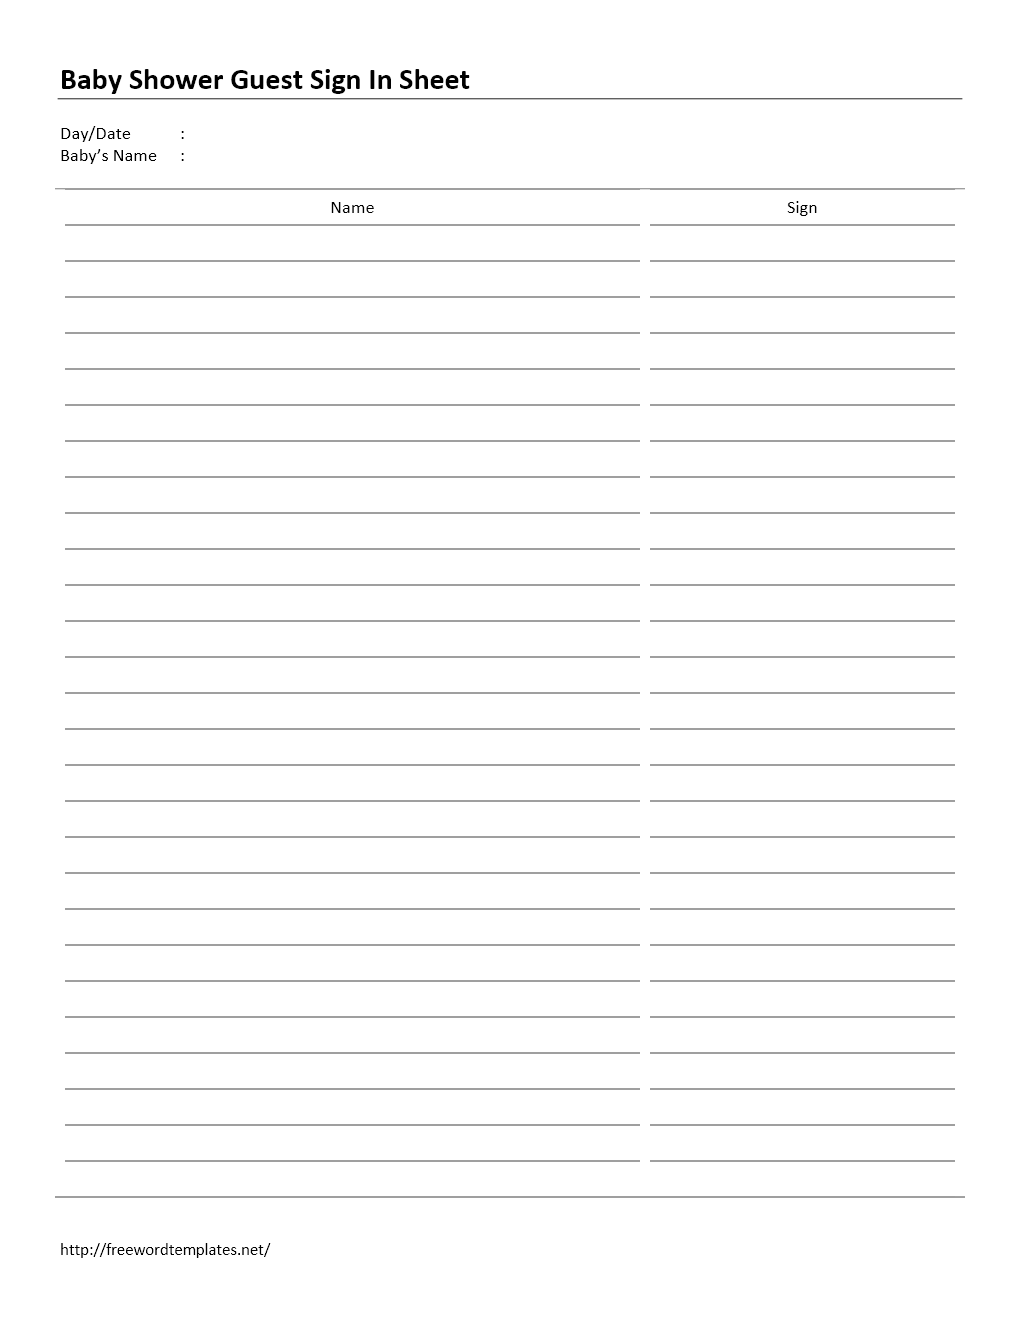 Baby Shower Guest Sign In Sheet Template